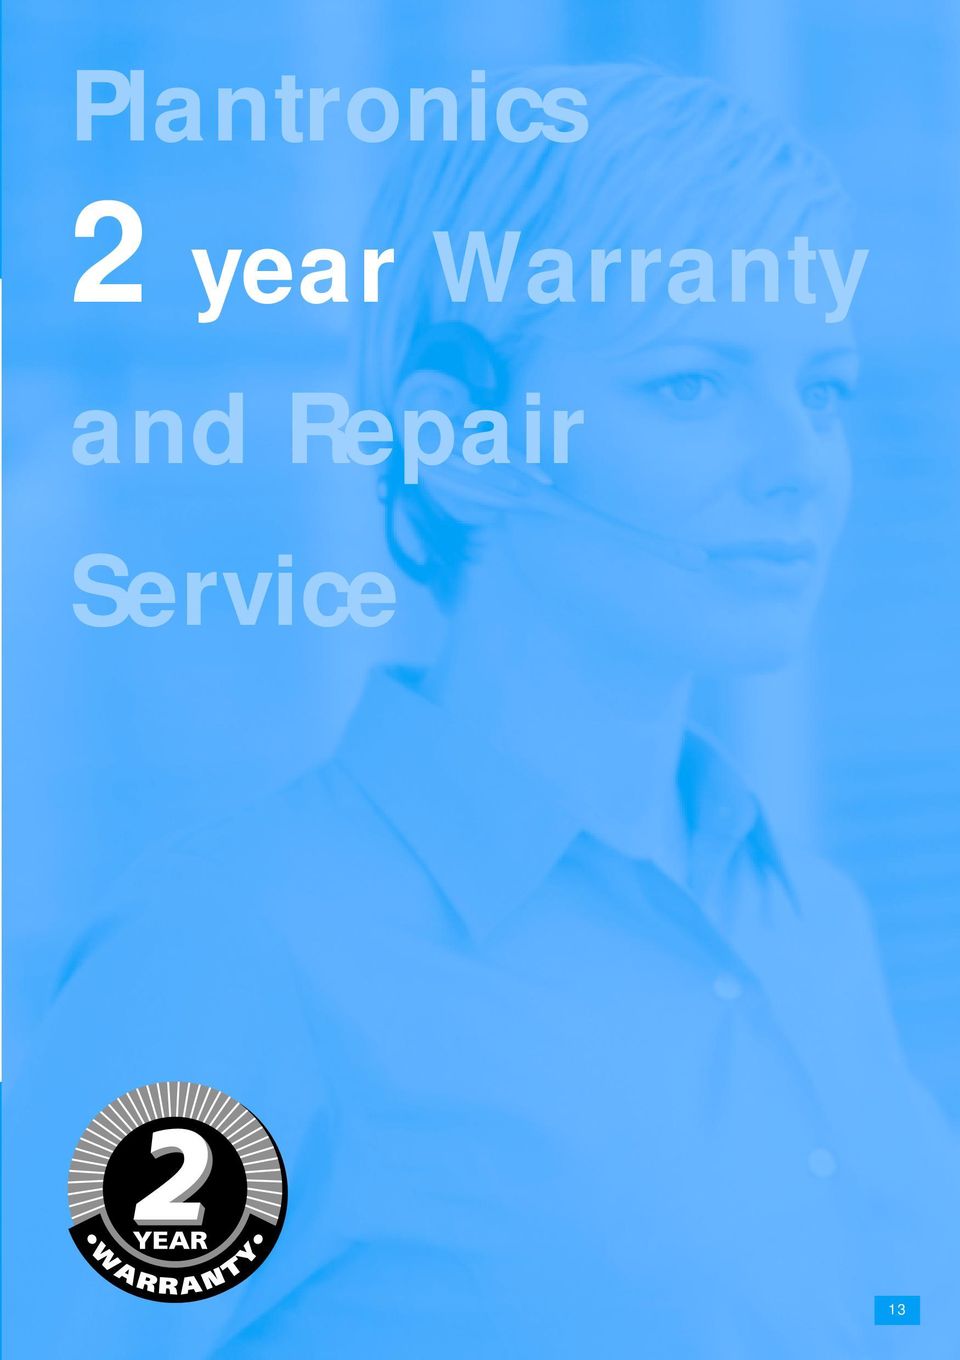 Warranty and